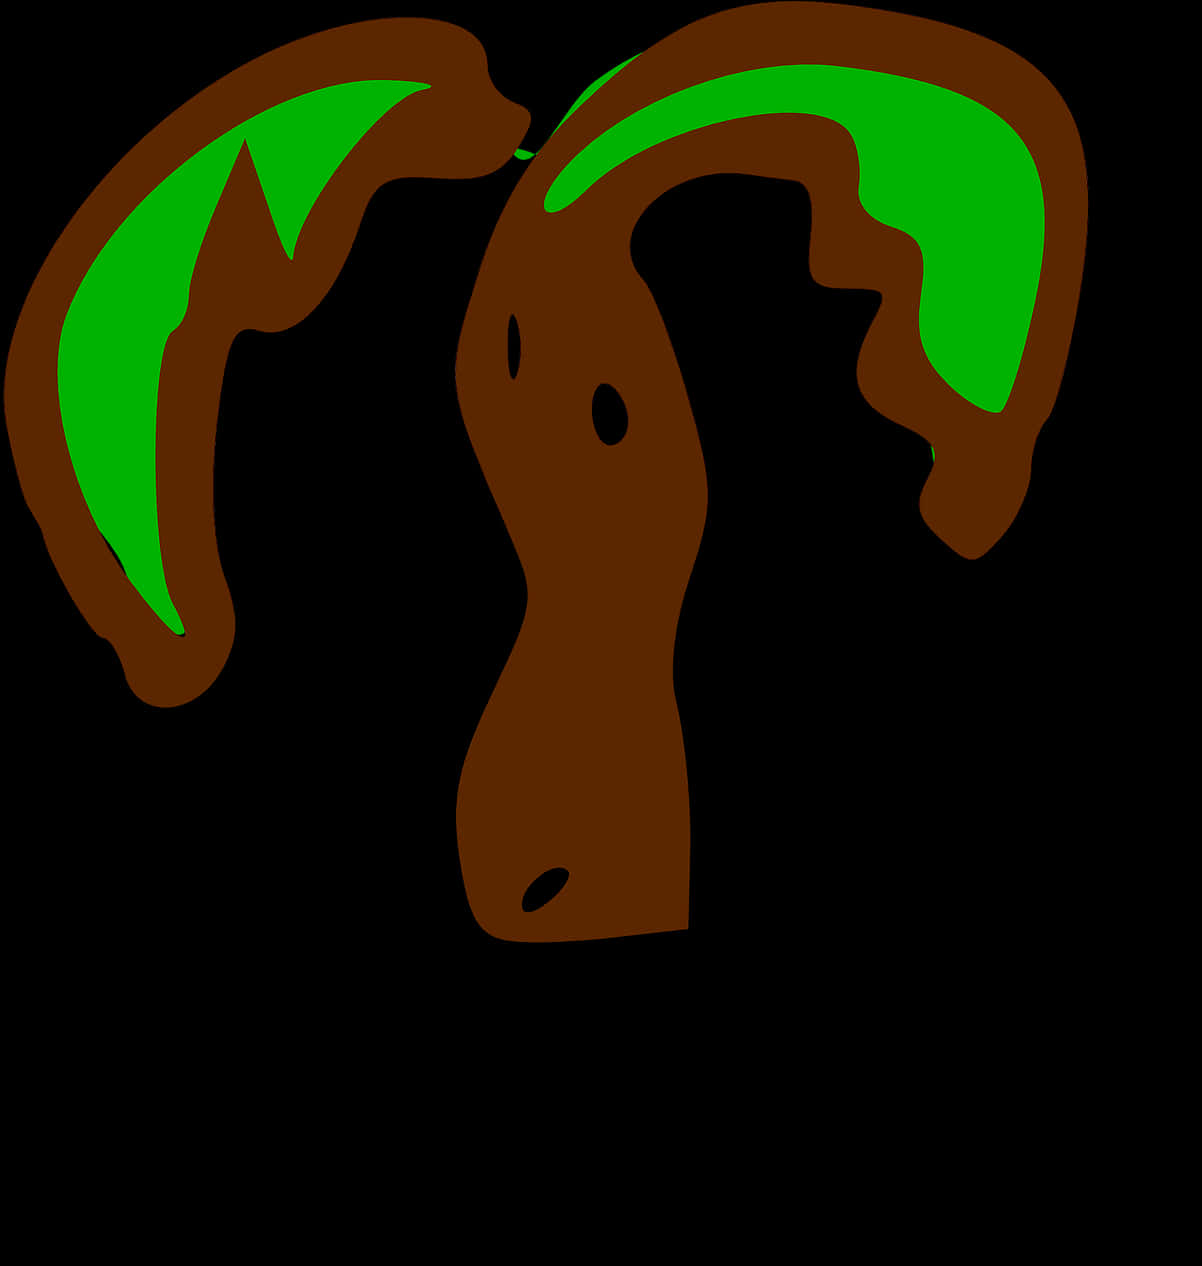 Intertwined Palm Trees Illustration